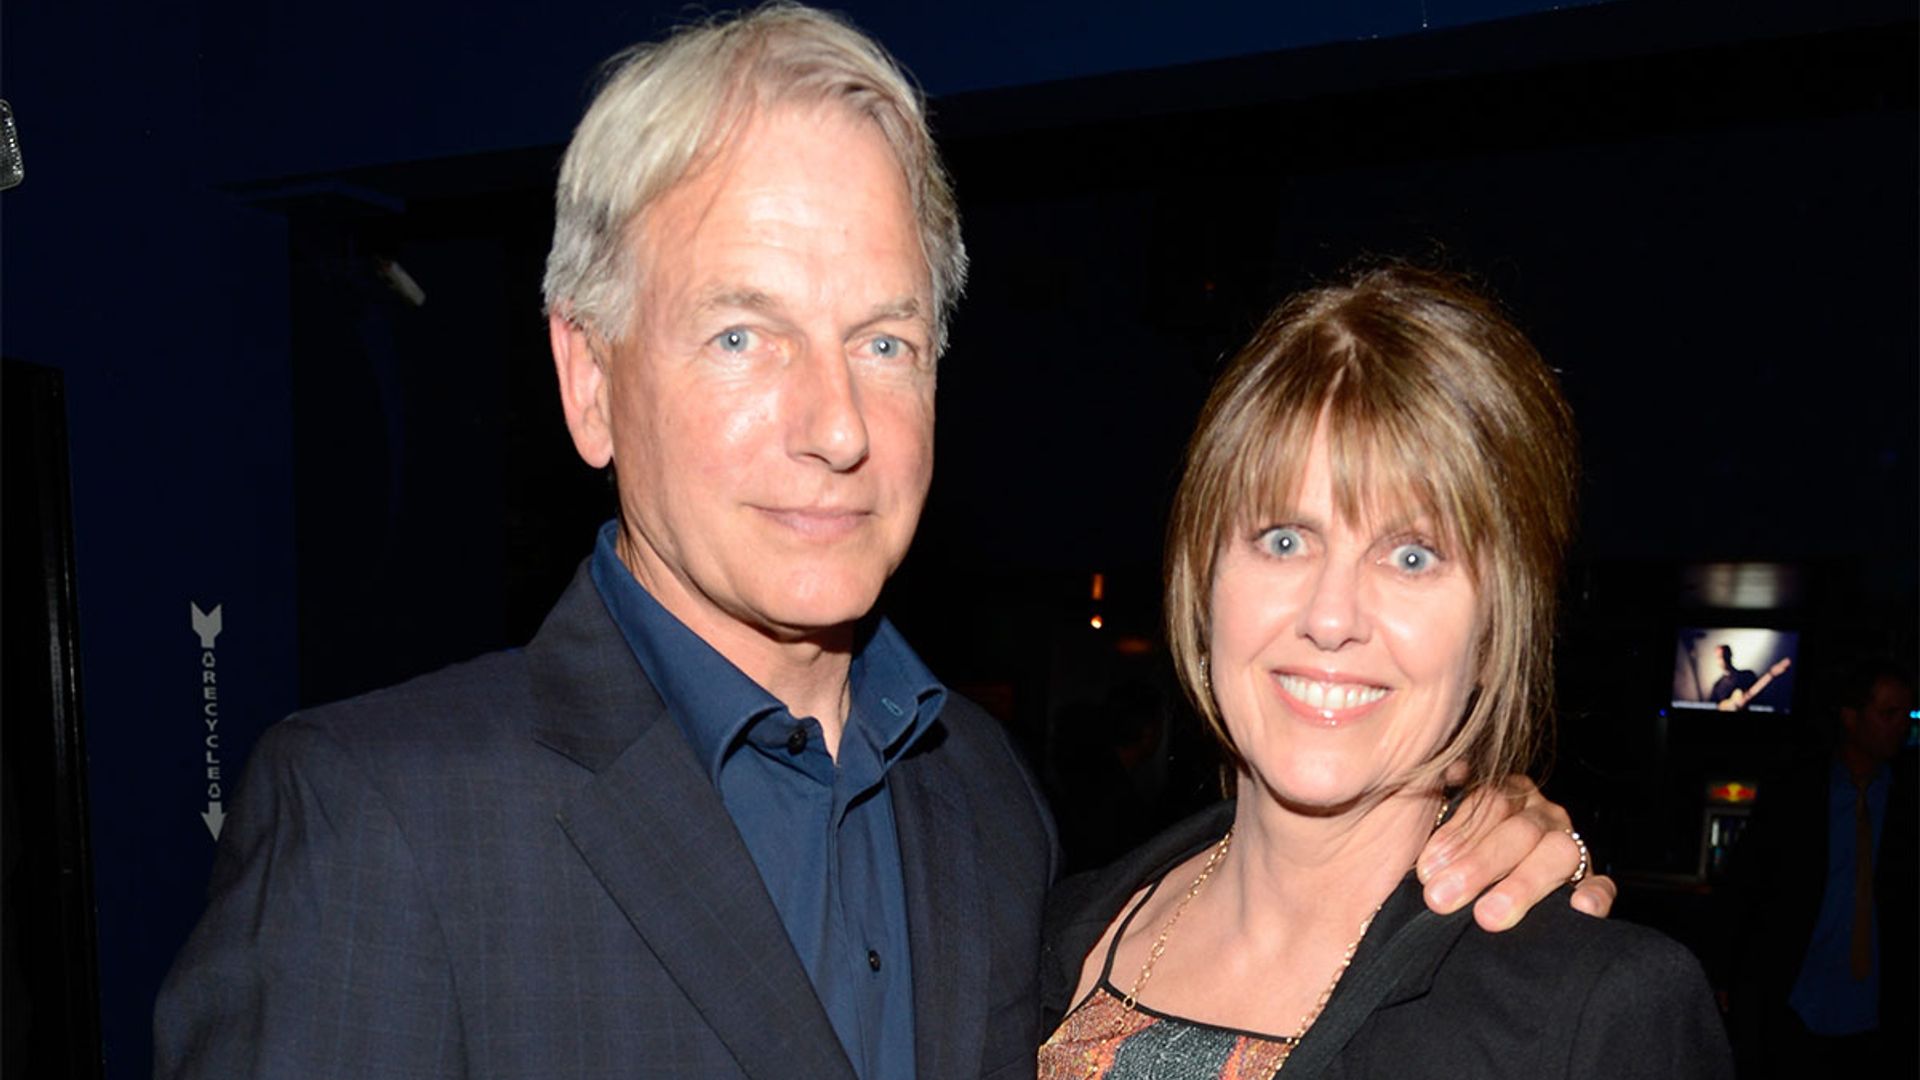 Mark Harmon's family's Thanksgiving will be different - and extra special - this year